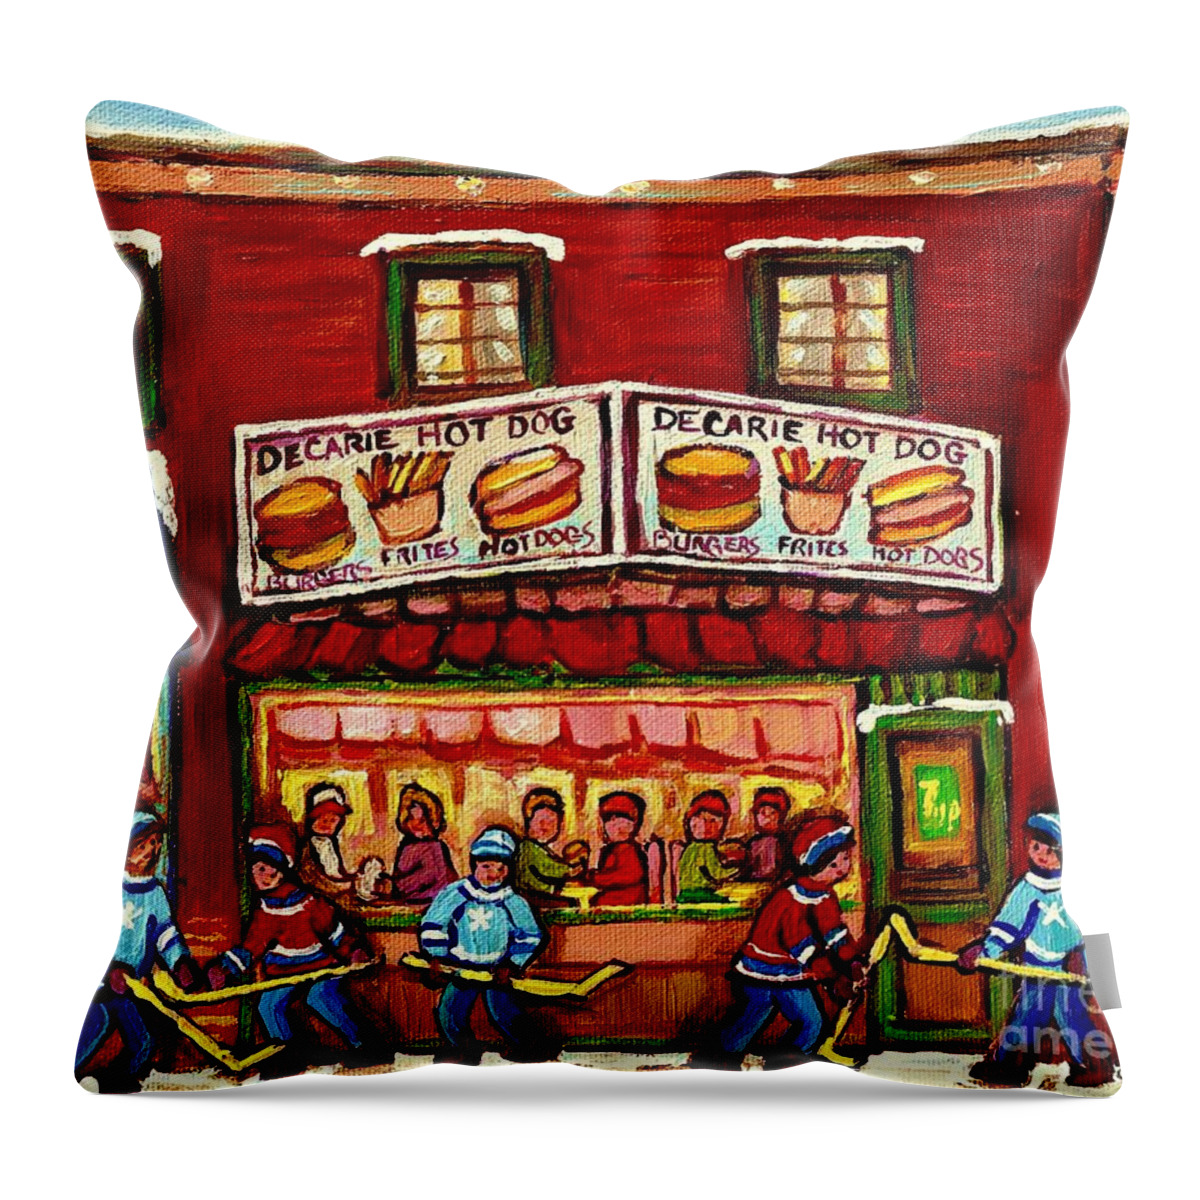 Montreal Throw Pillow featuring the painting Decarie Hot Dog Restaurant Cosmix Comic Store Montreal Paintings Hockey Art Winter Scenes C Spandau by Carole Spandau